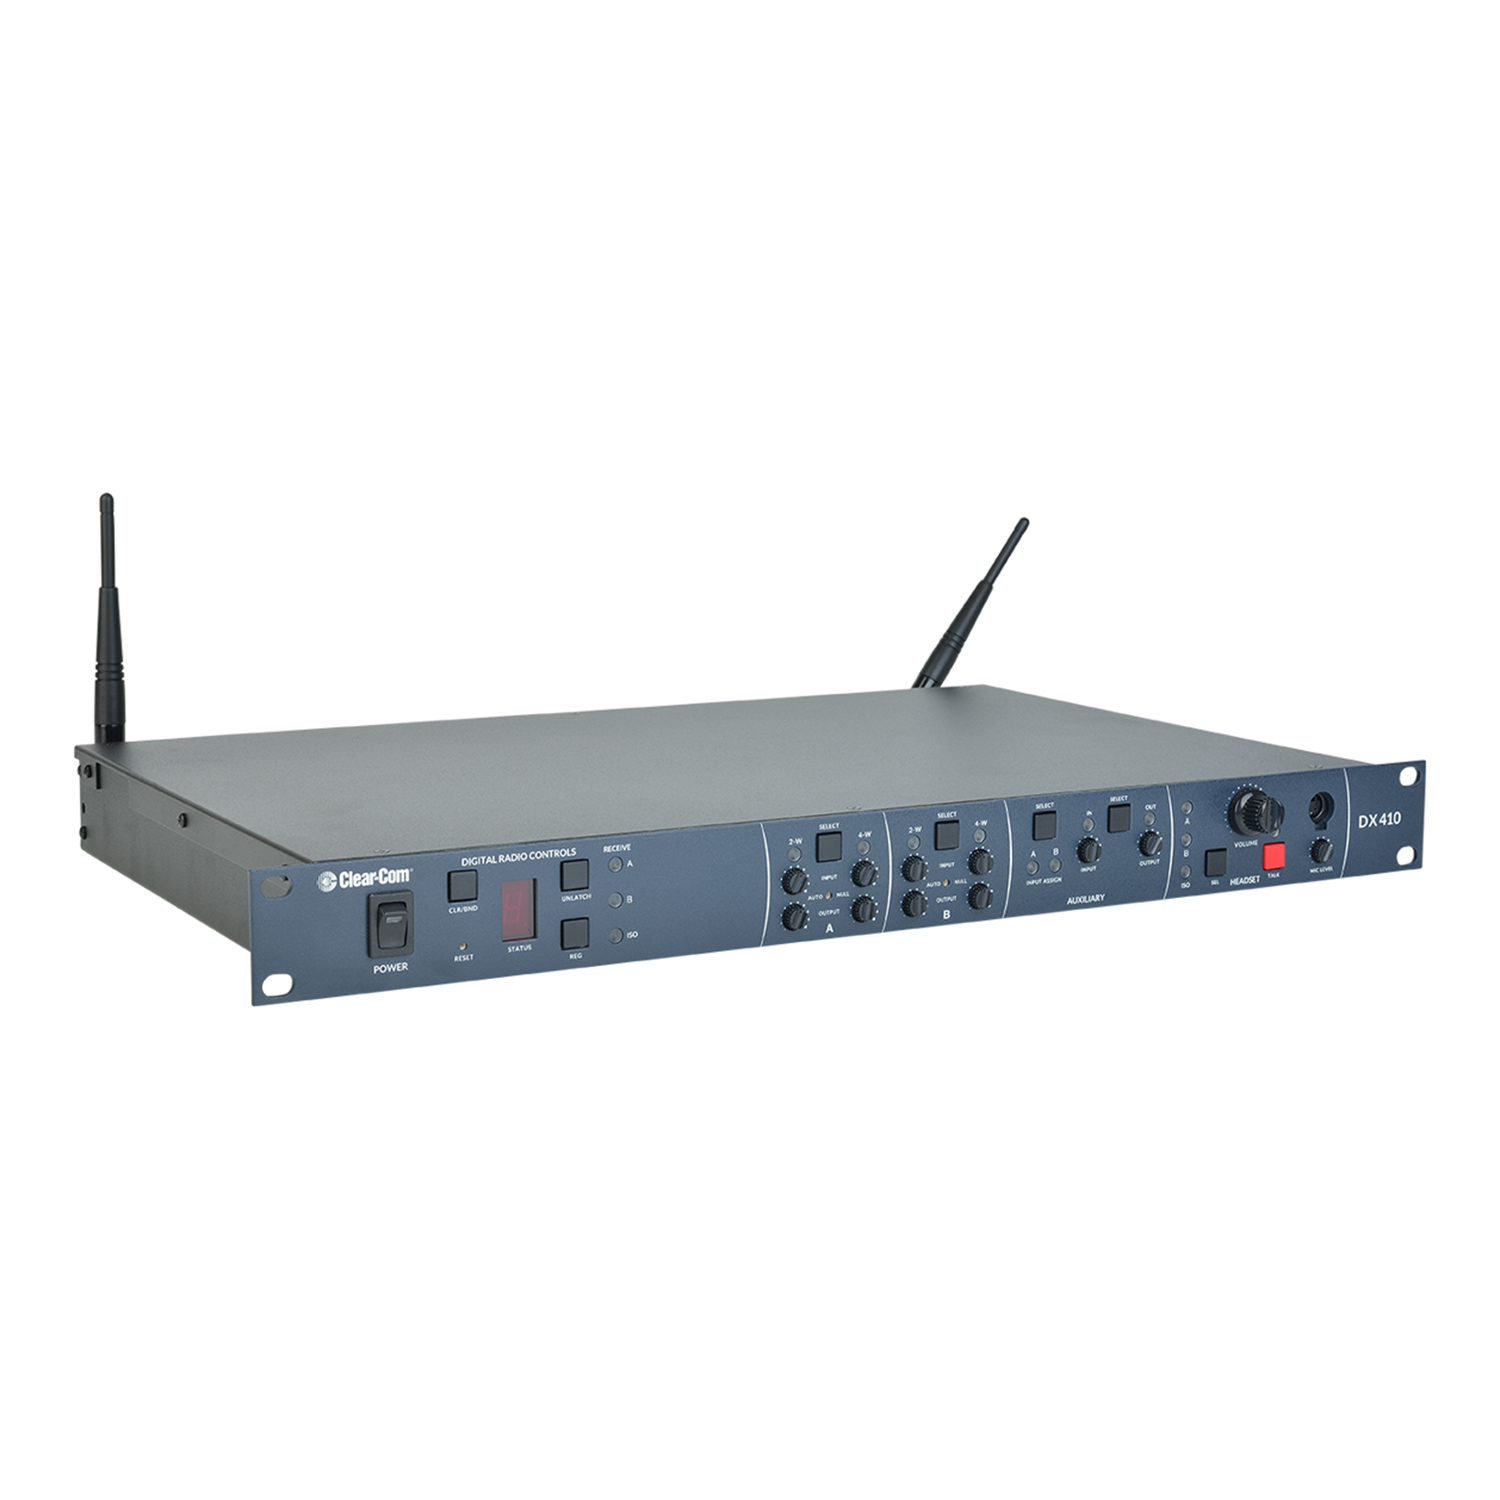 Clear-Com BS410 Base Station for DX410 Wireless Intercom System